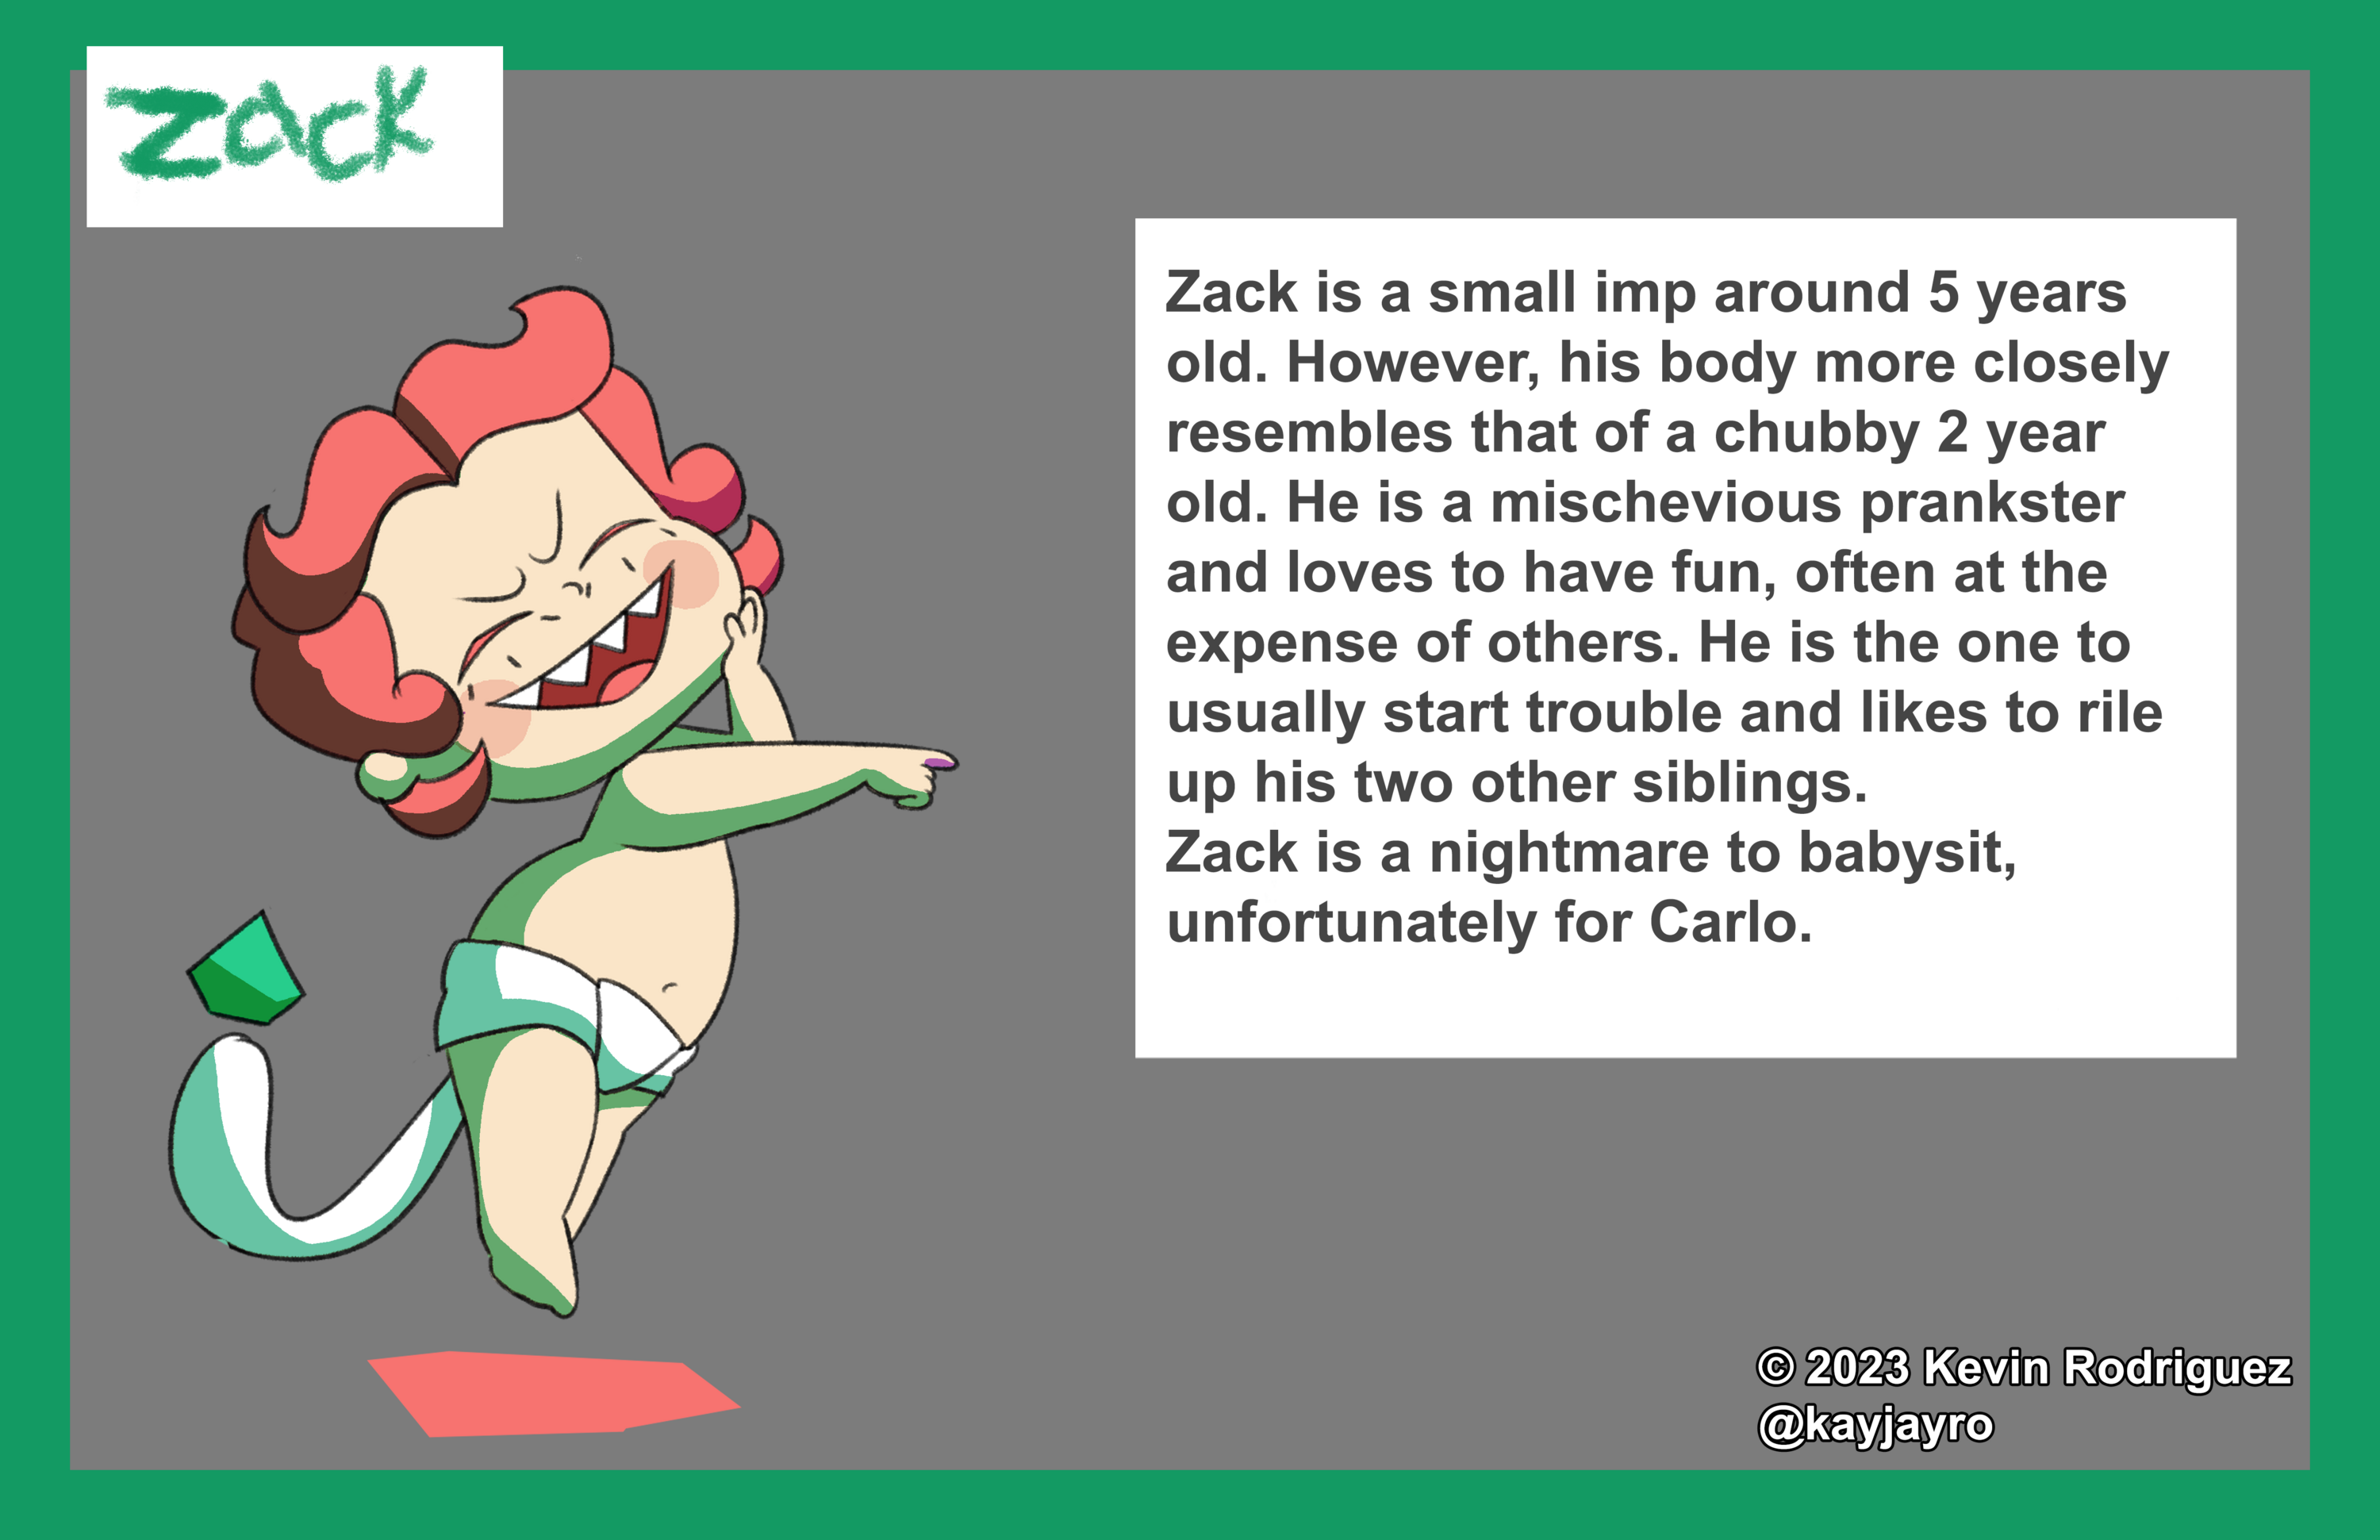 A page describing the character Zack